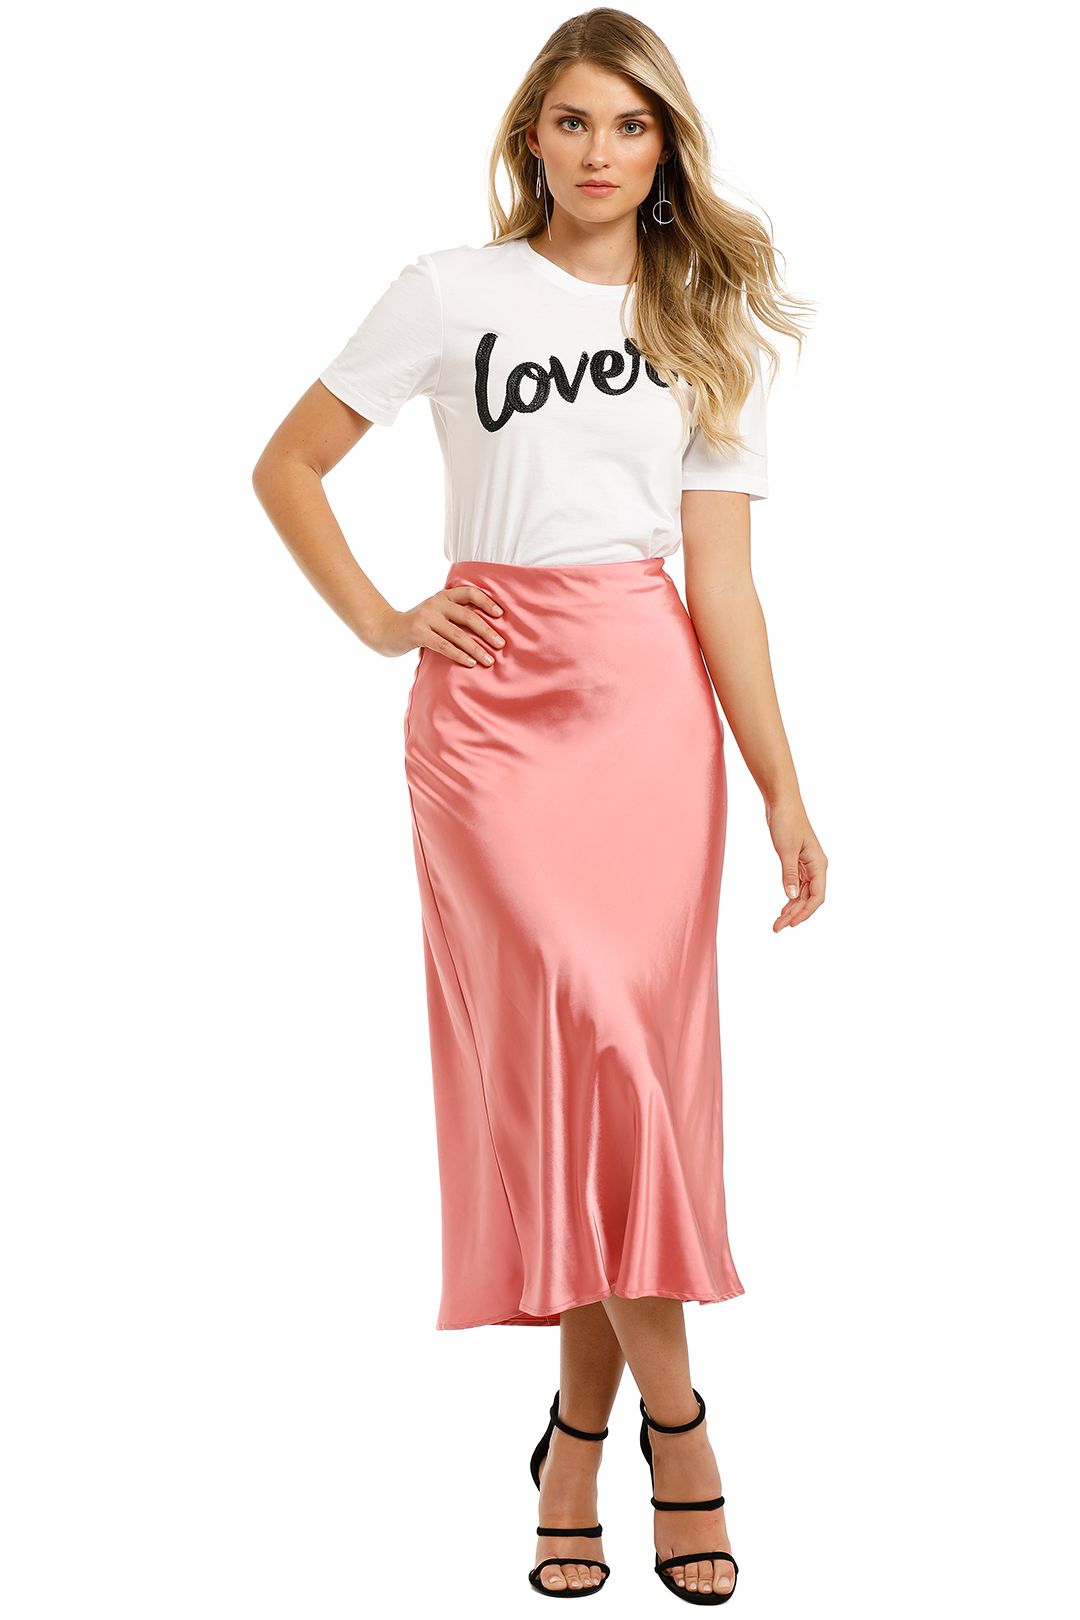 CMEO-Collective-Time-Flew-Skirt-Pink-Front